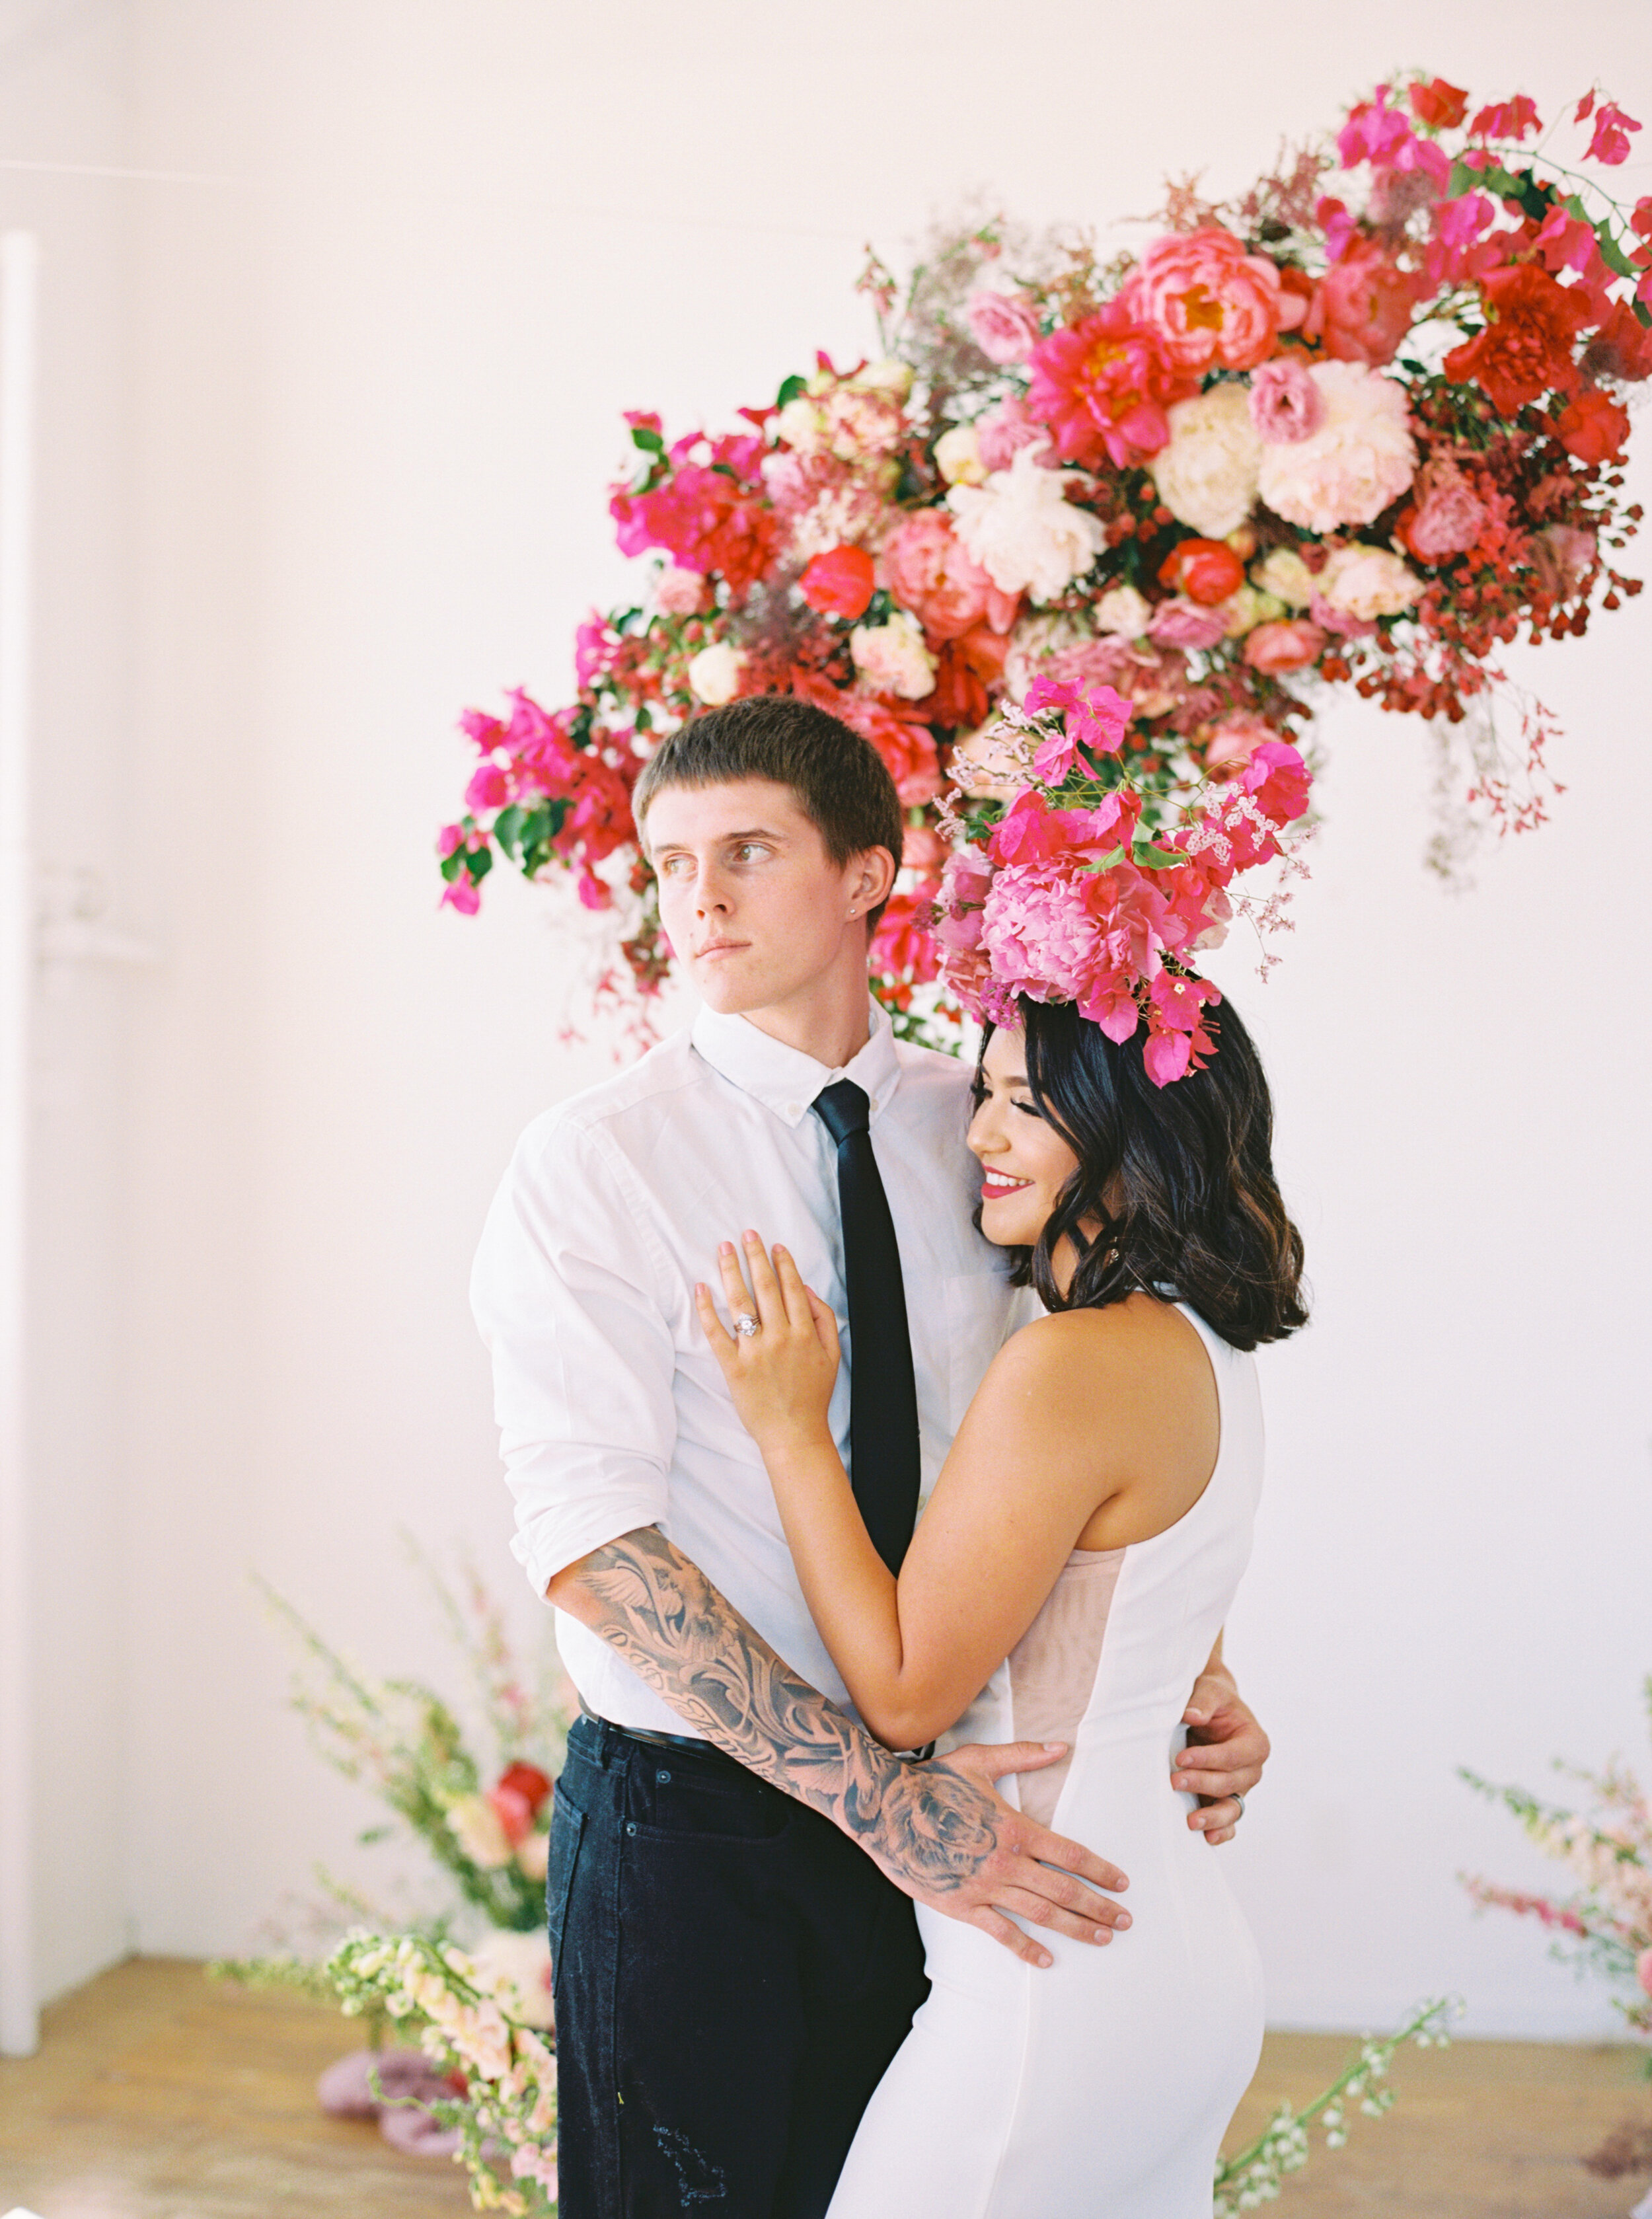 A Romantic Wedding Elopement Filled with Colorful Fuchsia - Sarahi Hadden Submission-124.jpg